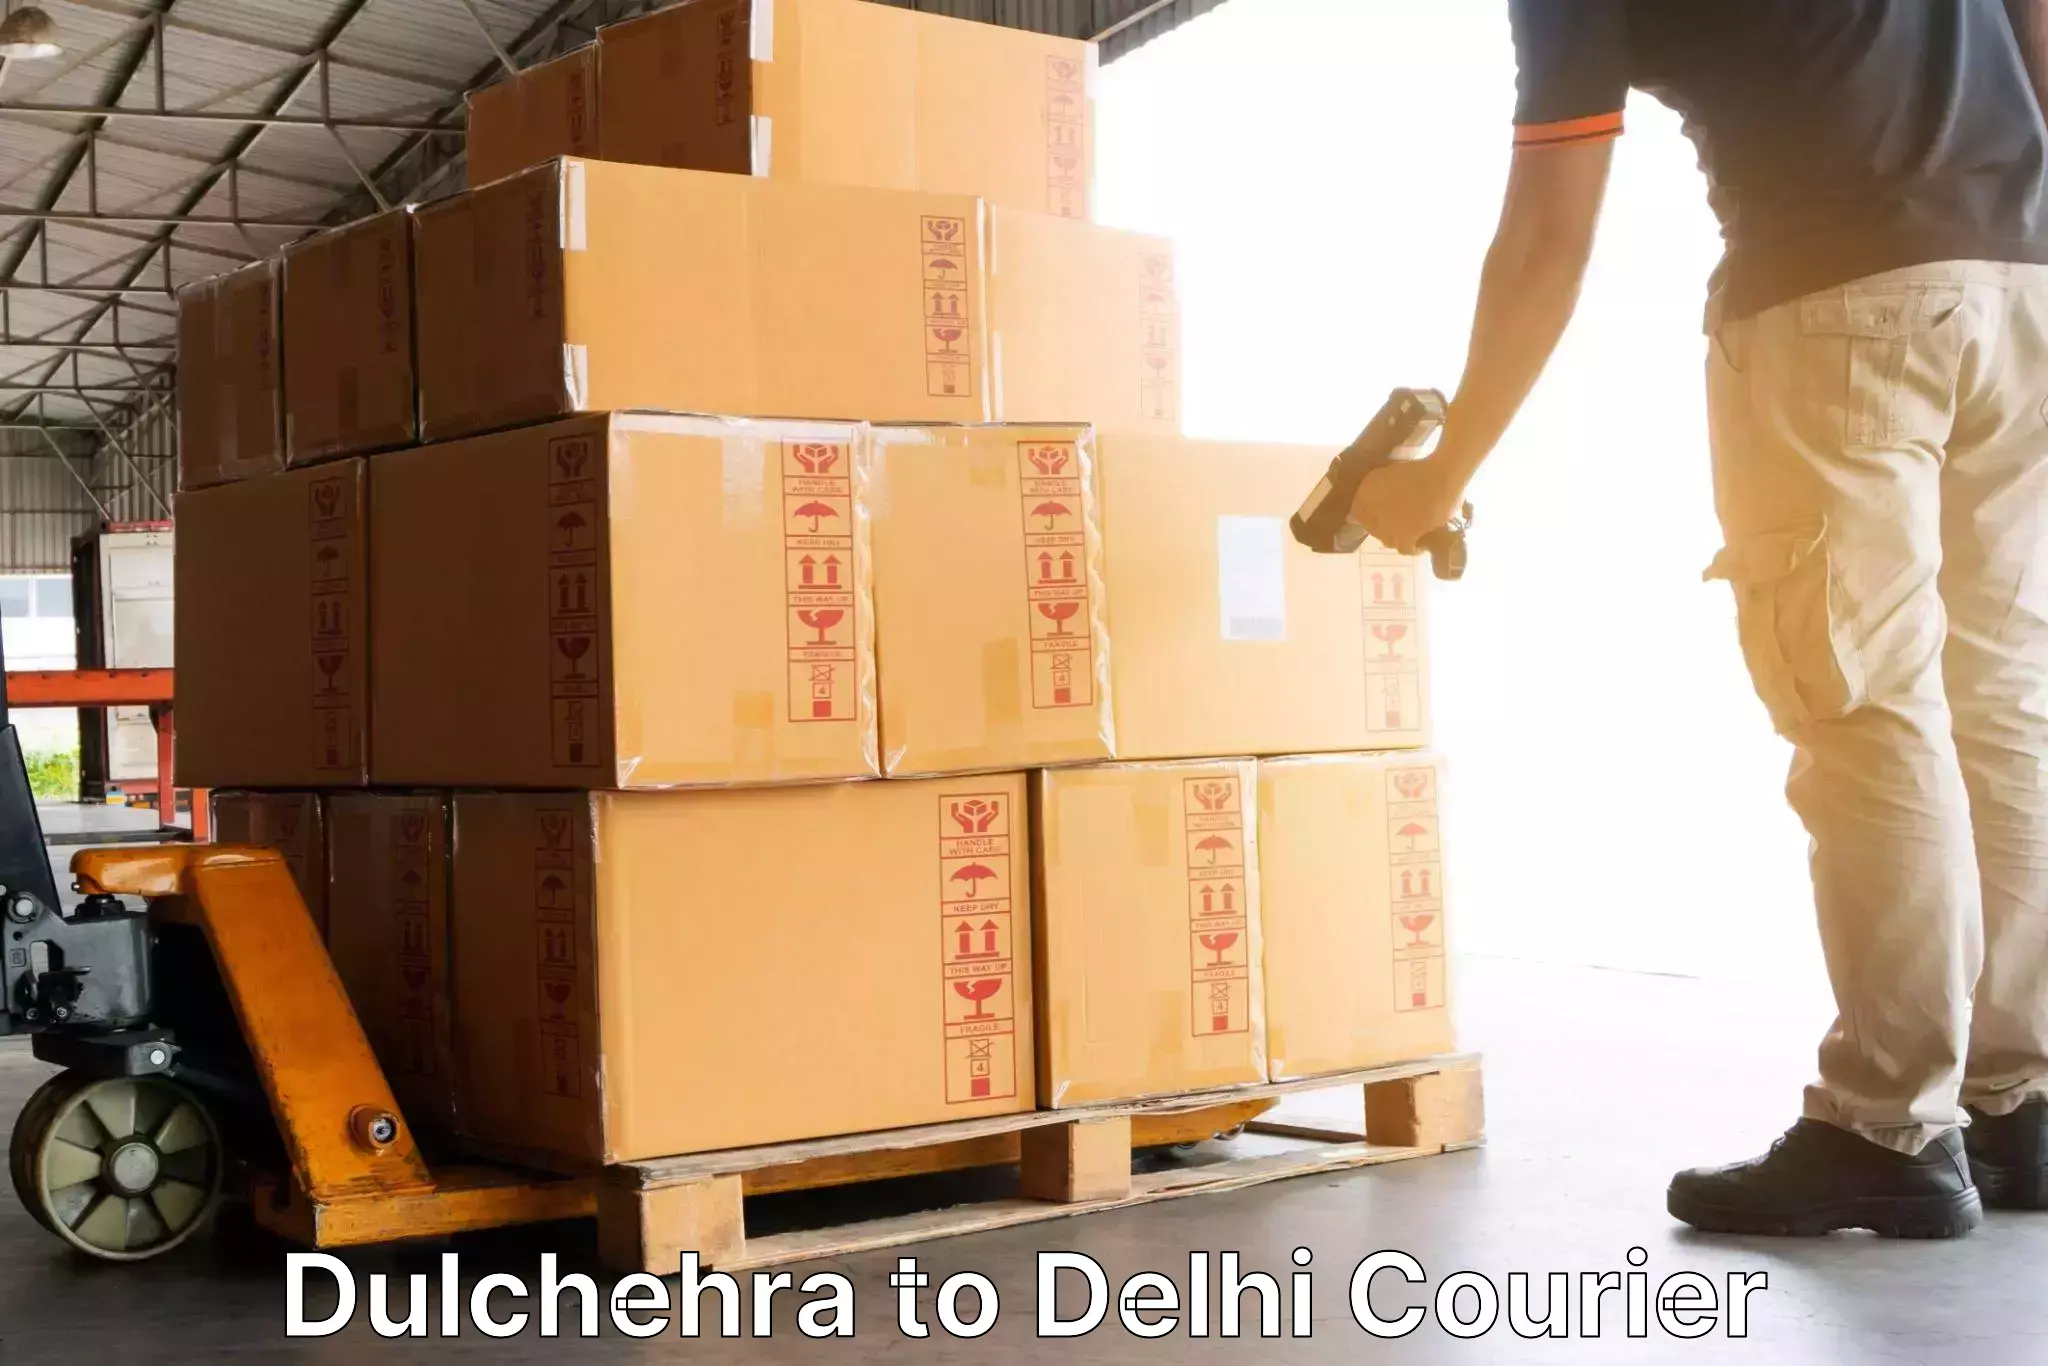 Online package tracking Dulchehra to NCR